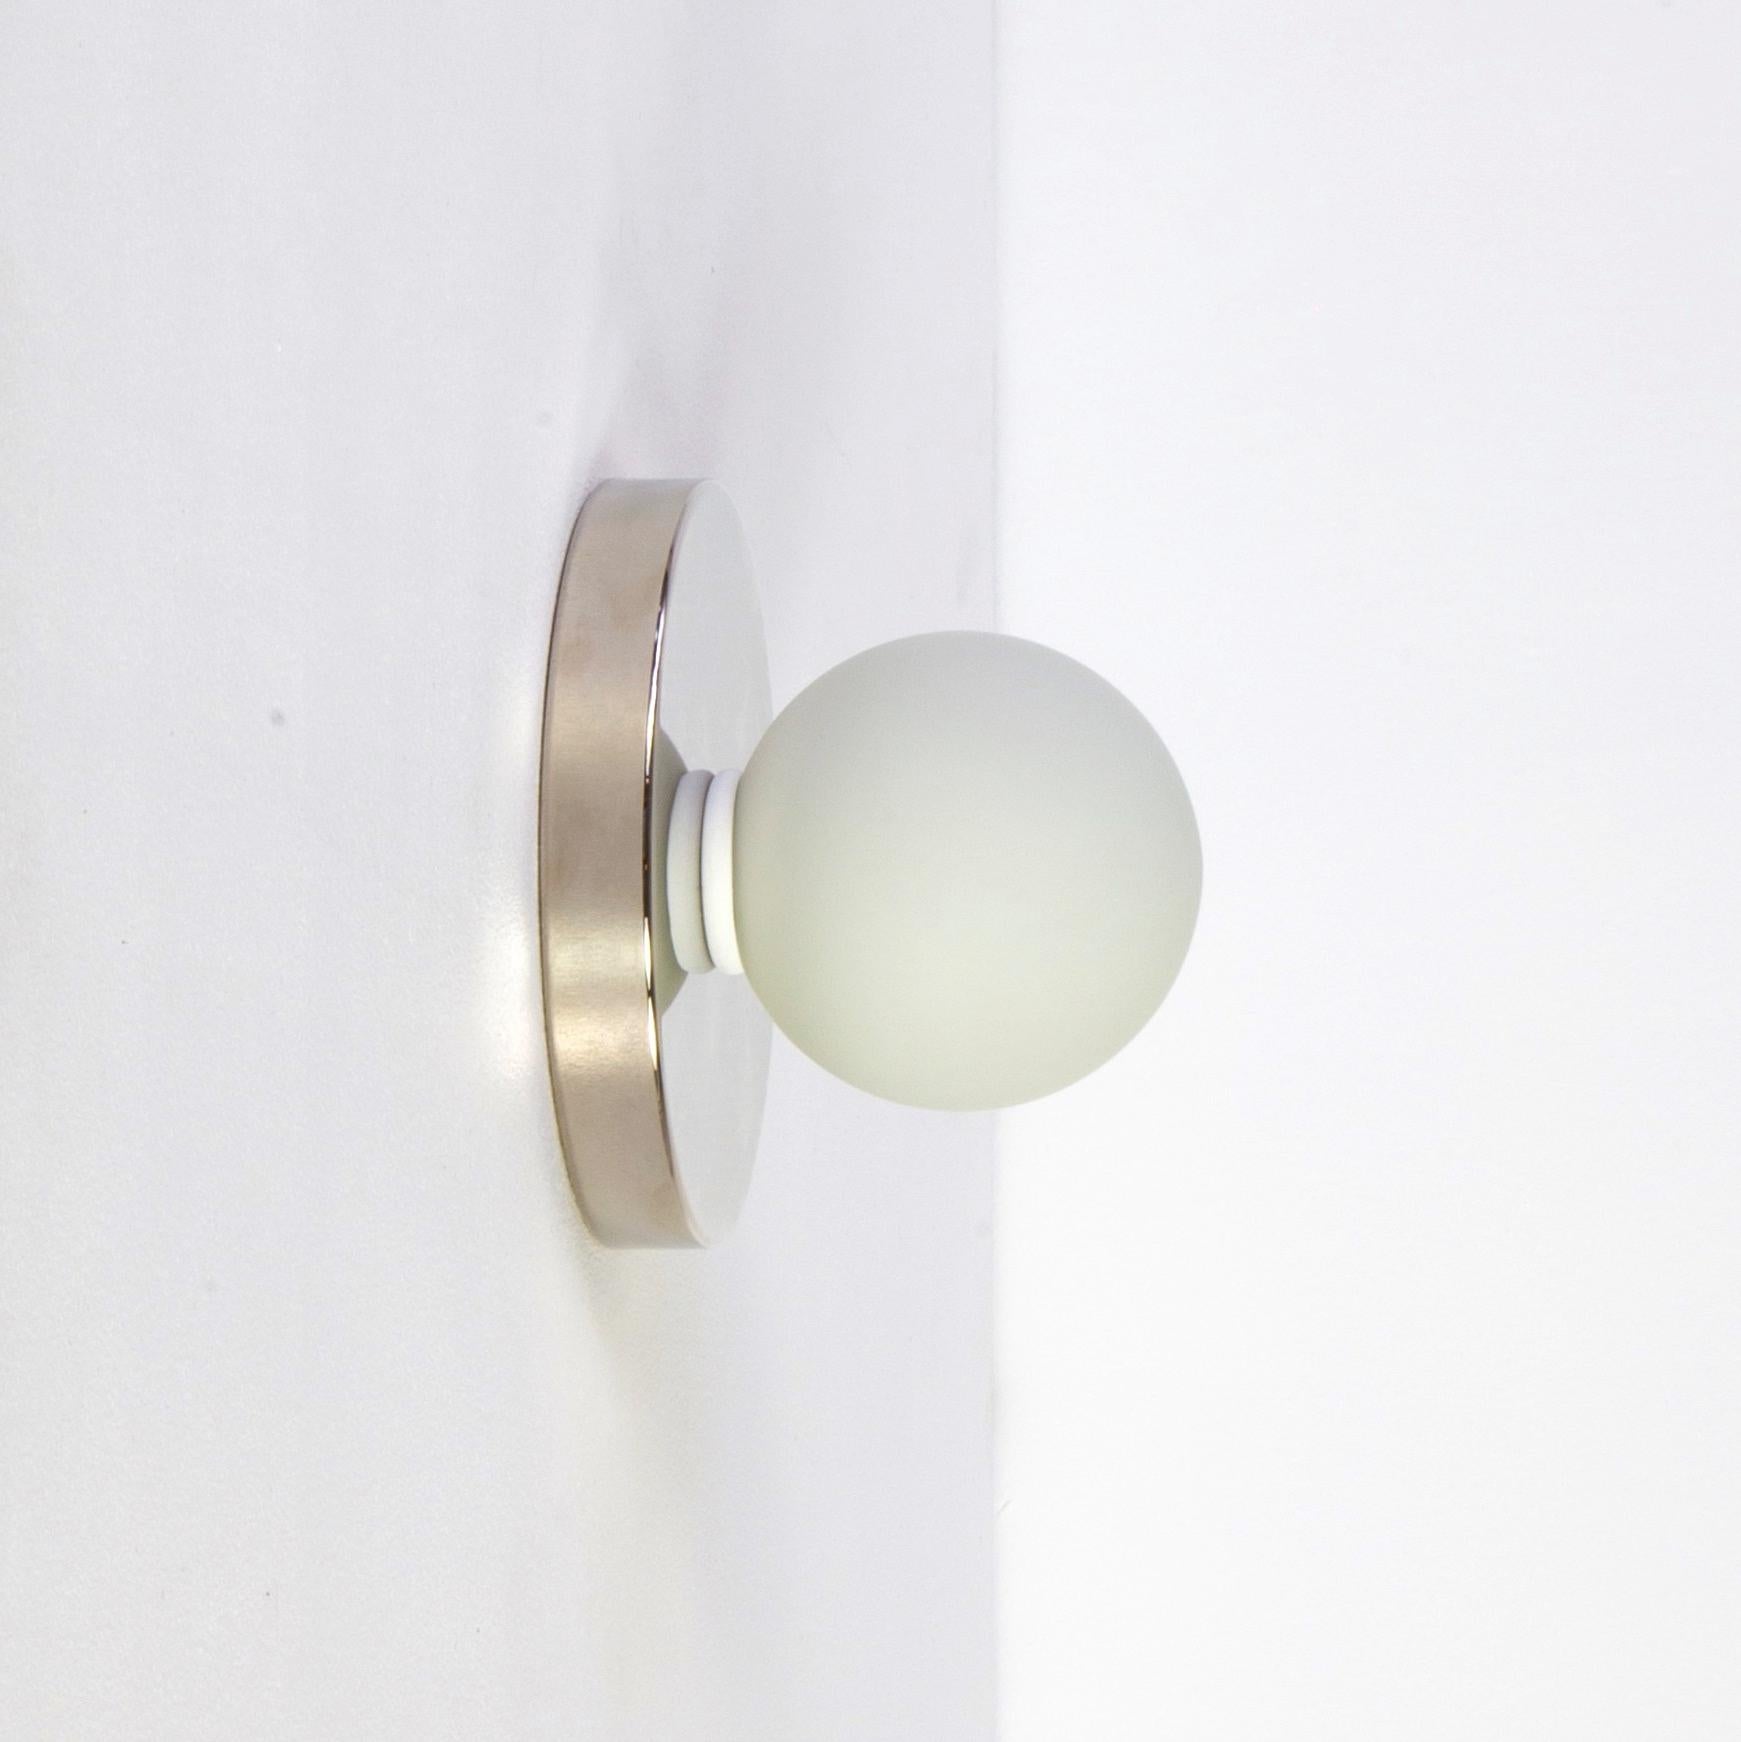 Contemporary Pair of Globe Sconces by Research.Lighting, Polished Nickel, Made to Order For Sale